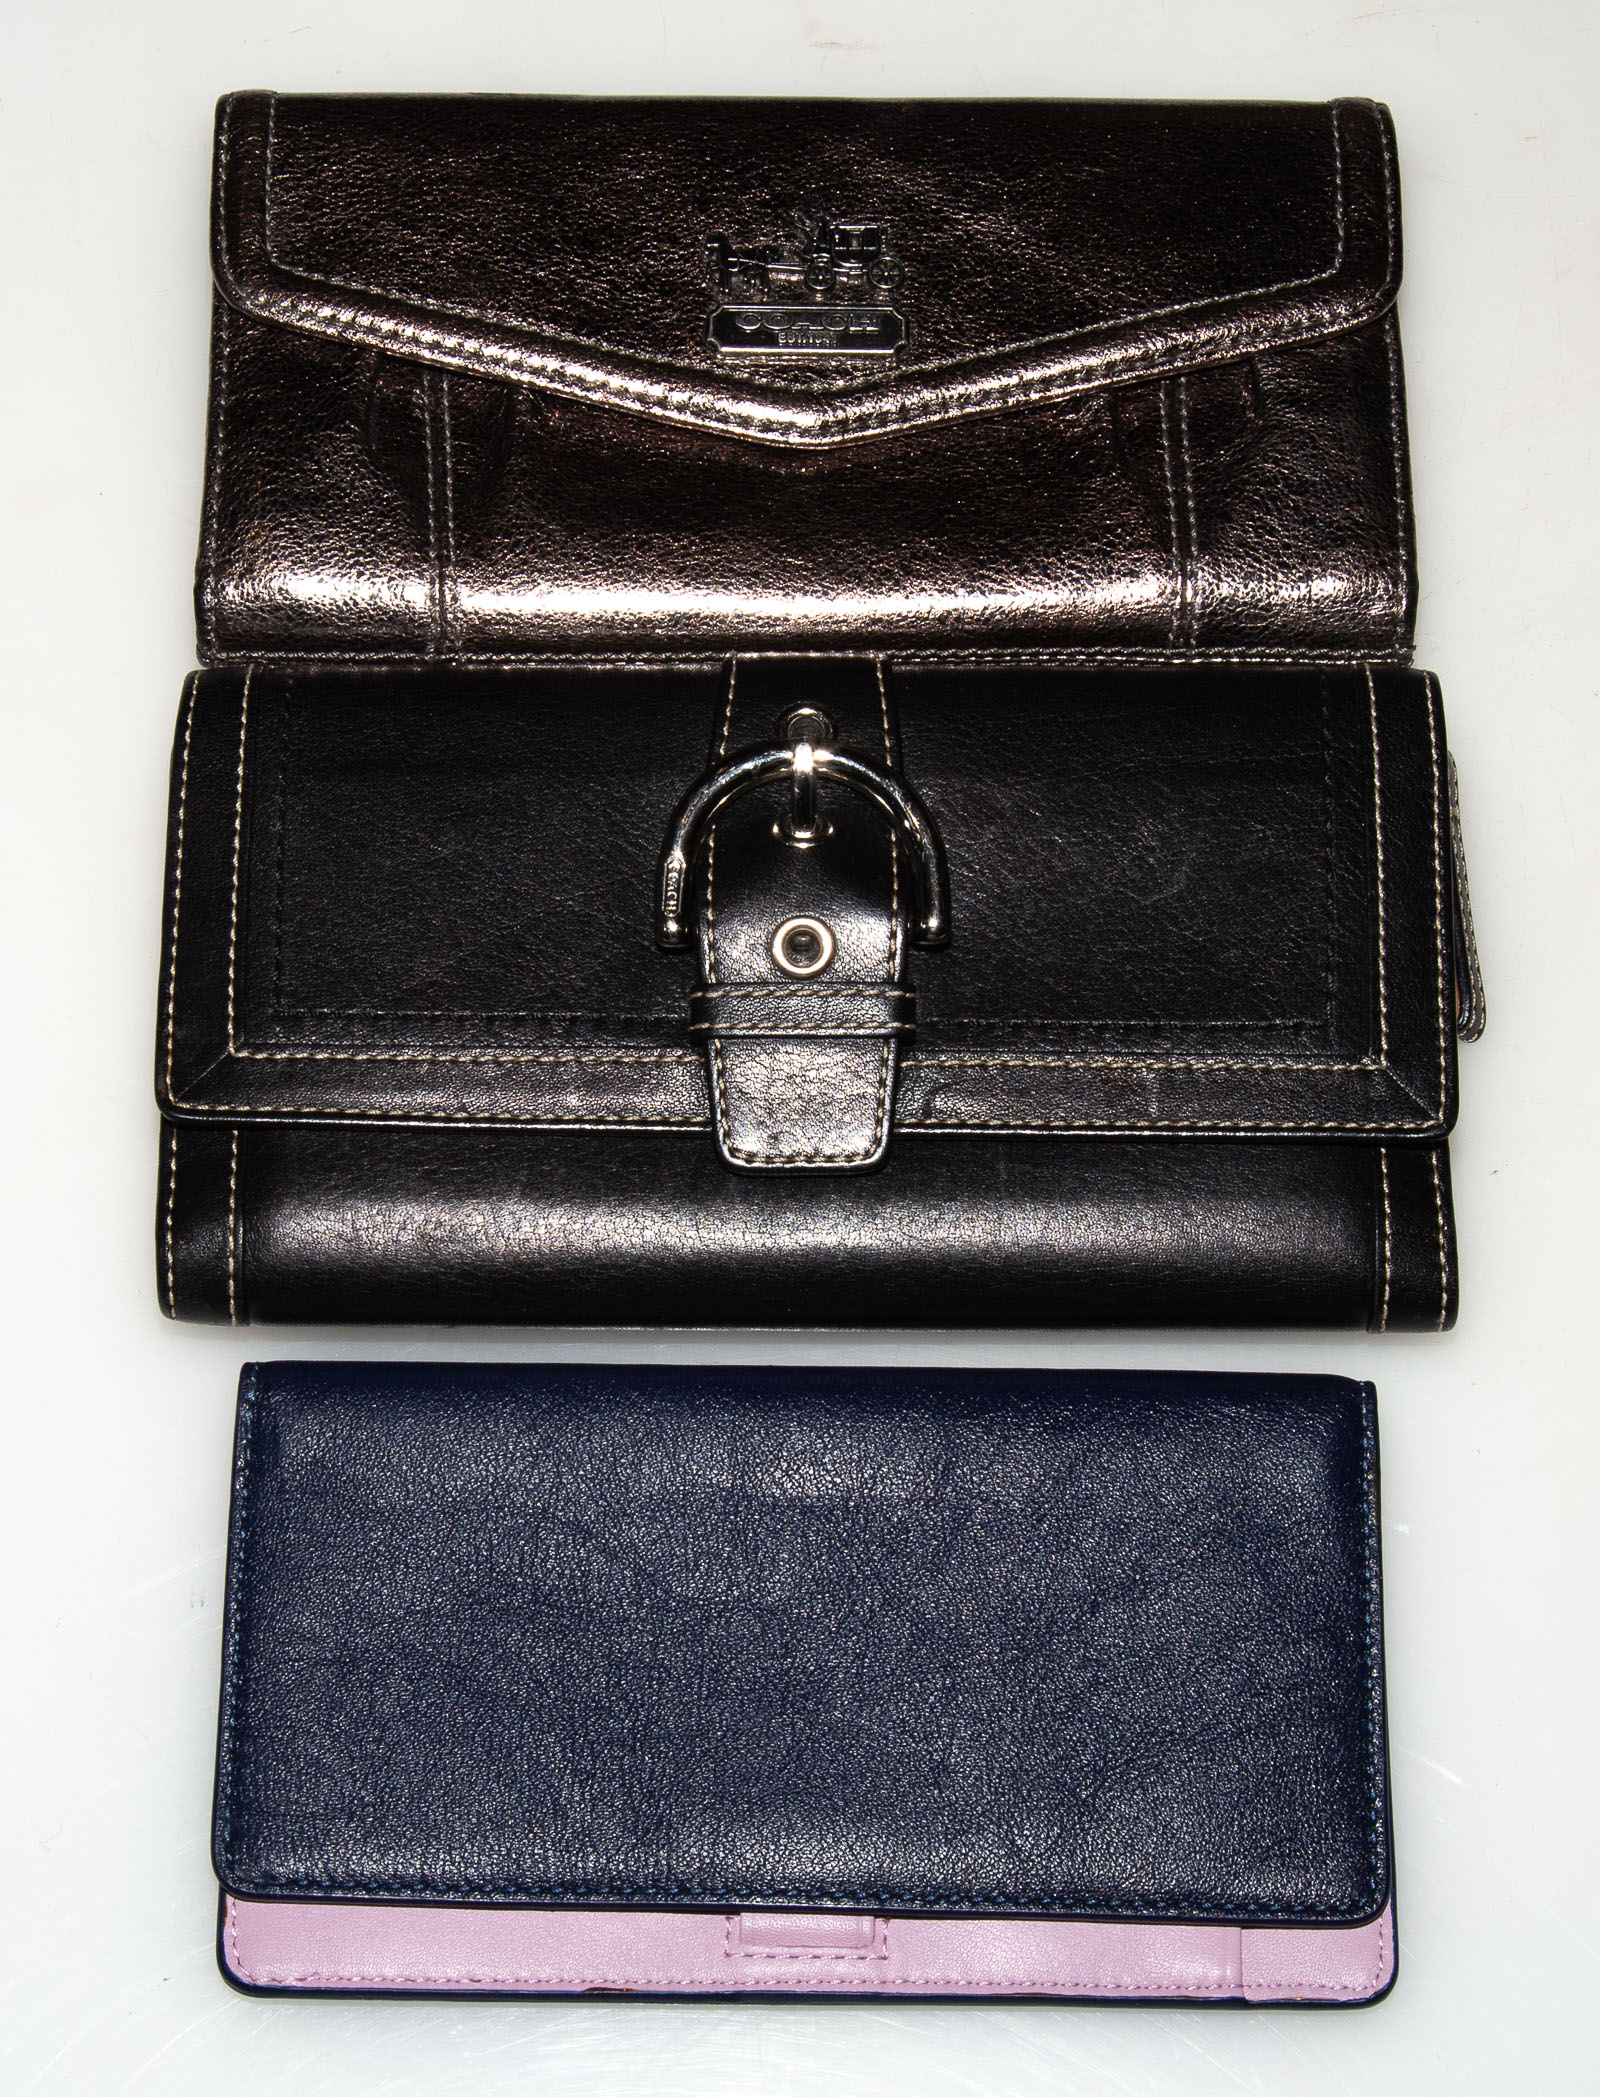 TWO COACH LEATHER WALLETS & A CHECKBOOK